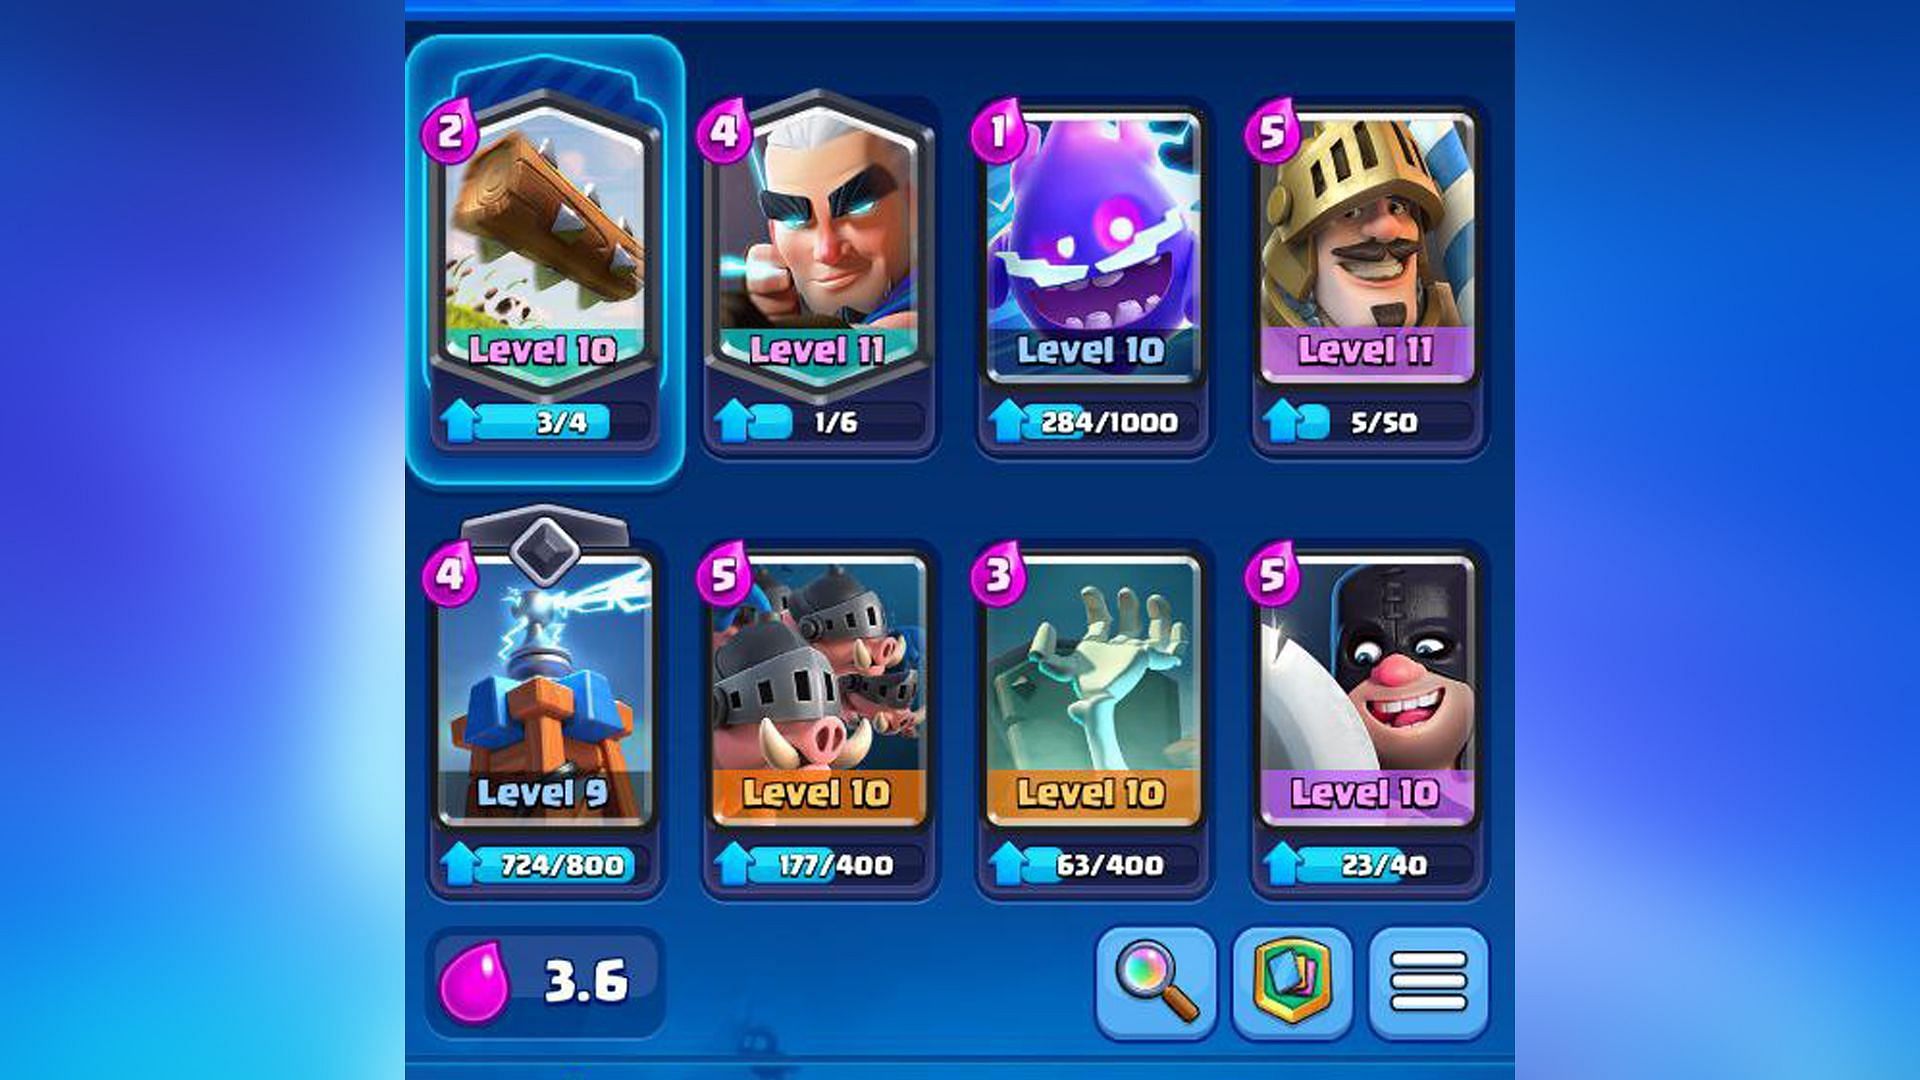 Electro Spirit cycle deck (Image via Supercell)